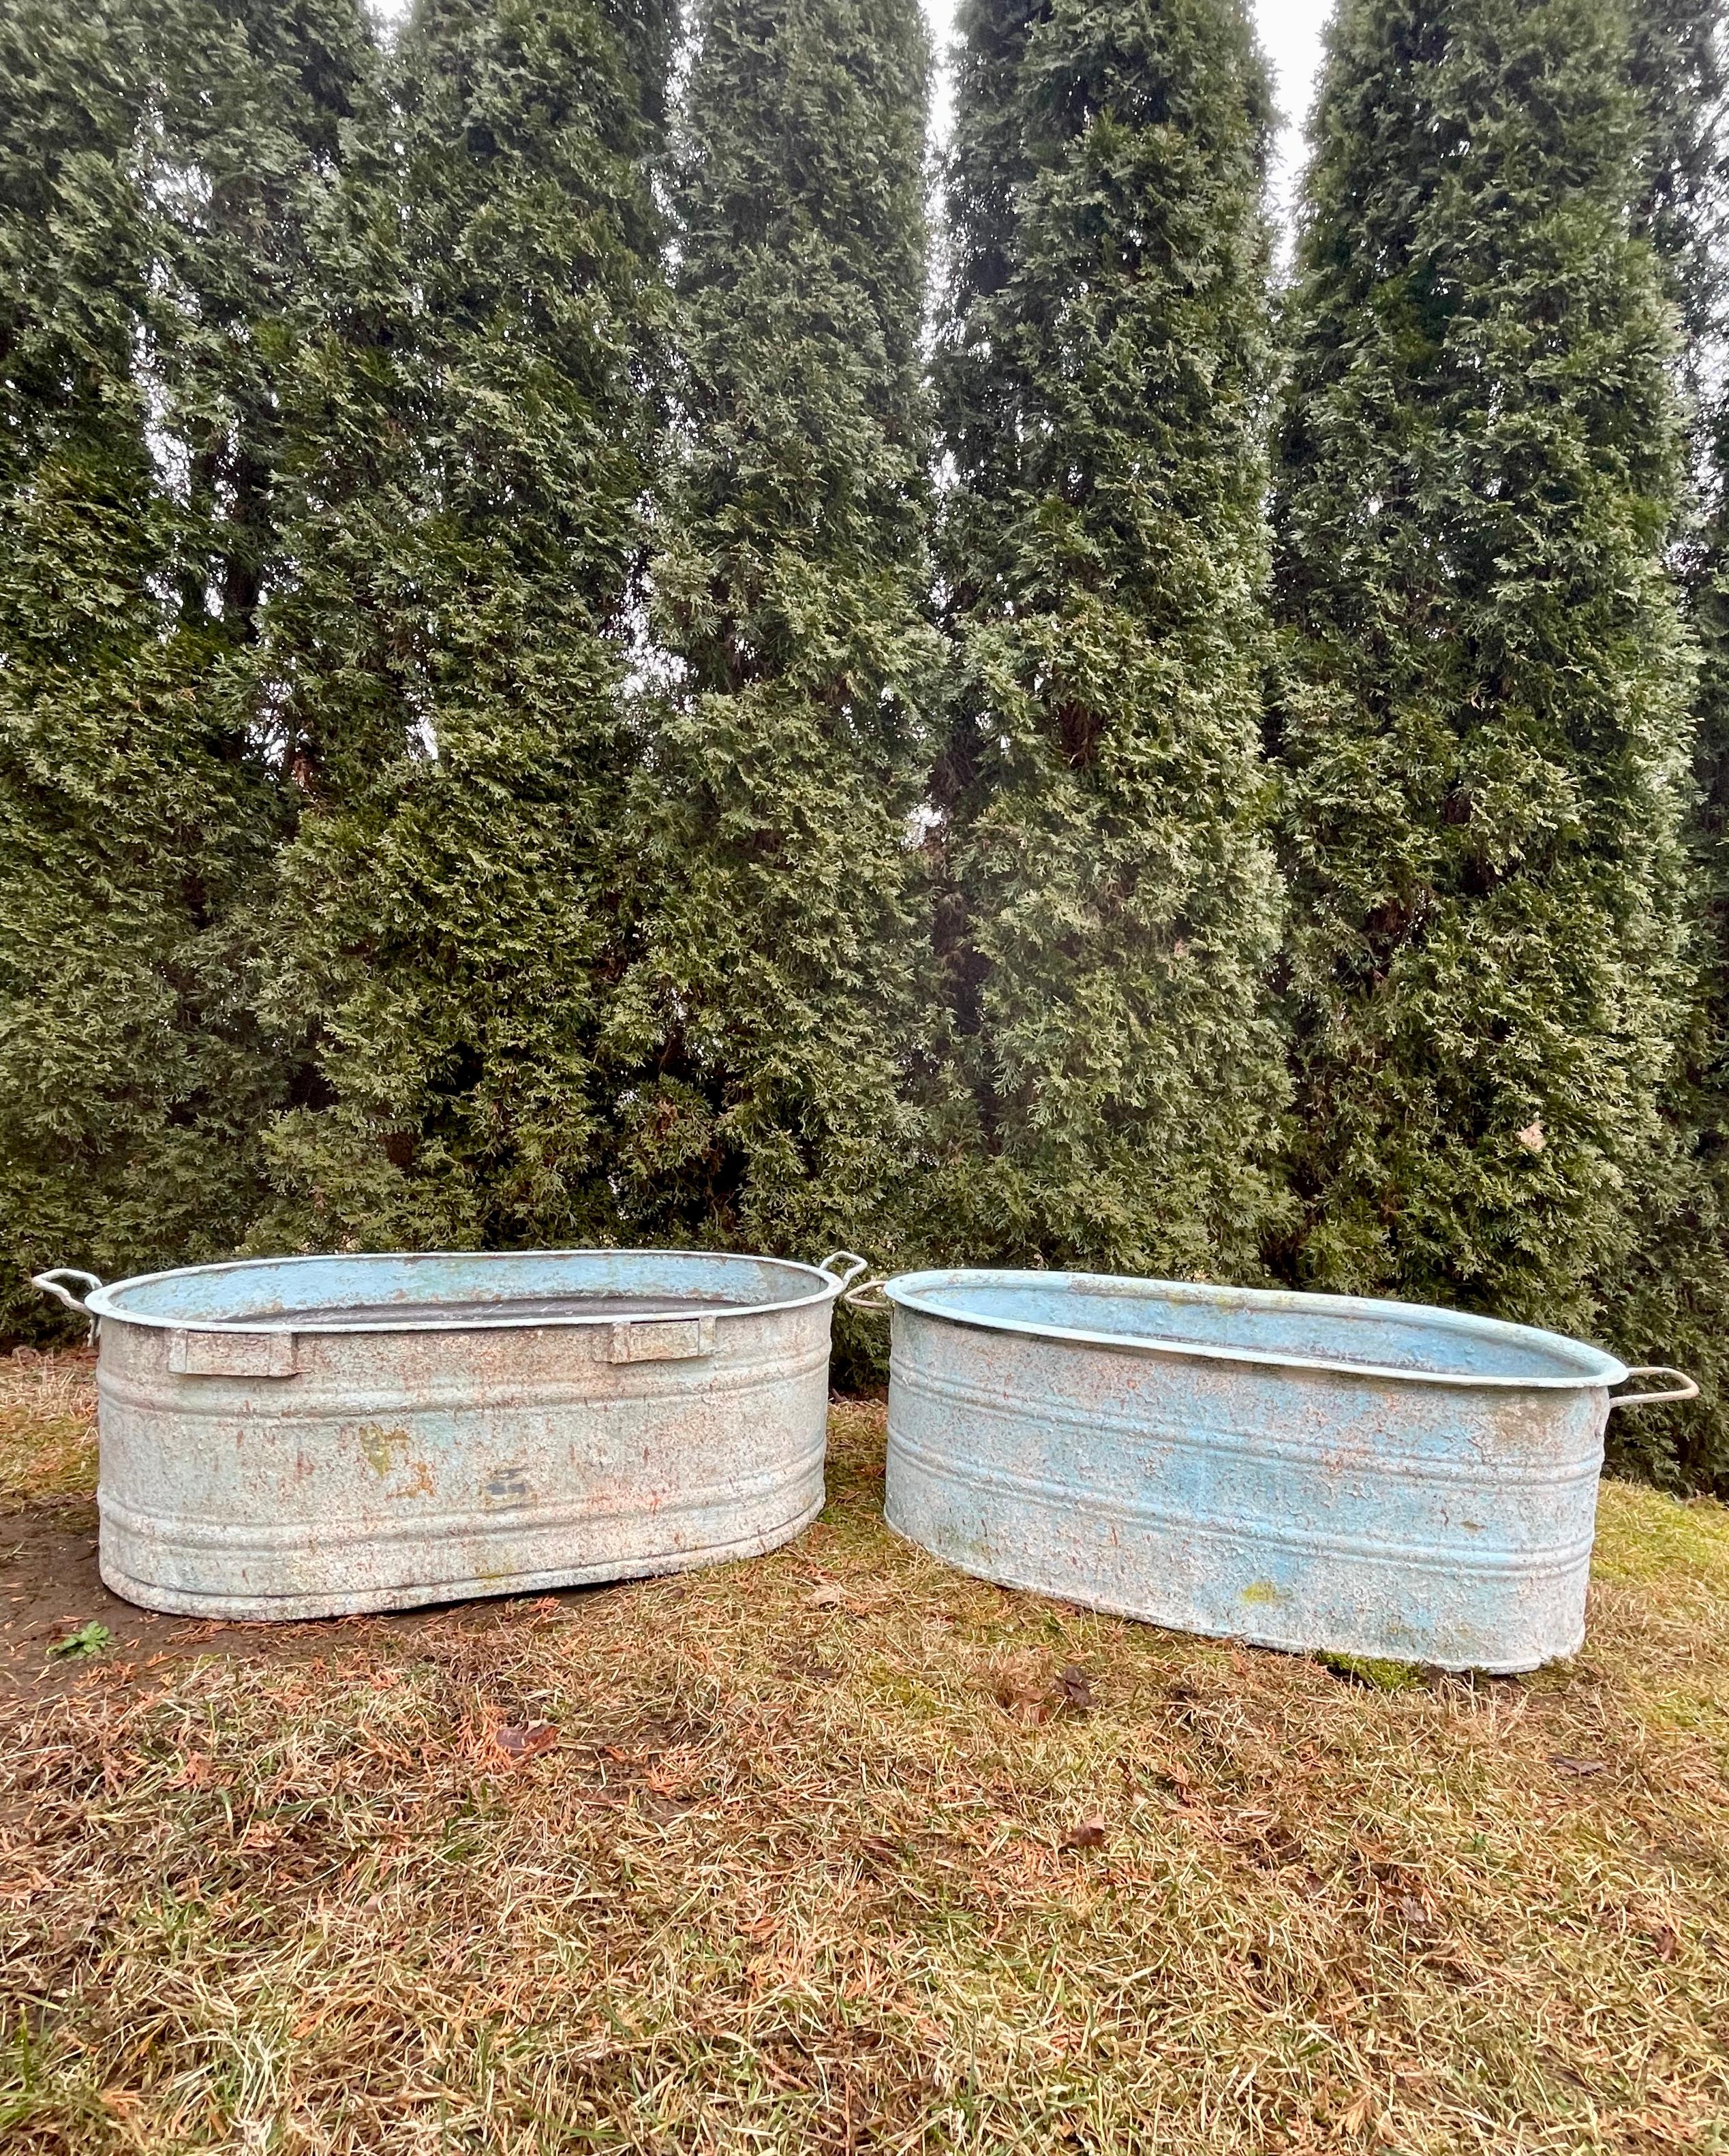 We were fortunate to source several near-pairs of these marvelous galvanized tub planters that date to the 1930s and had them custom-finished by a very talented artisan in Spain. This is one of three near-pairs that we have (the fourth near-pair is